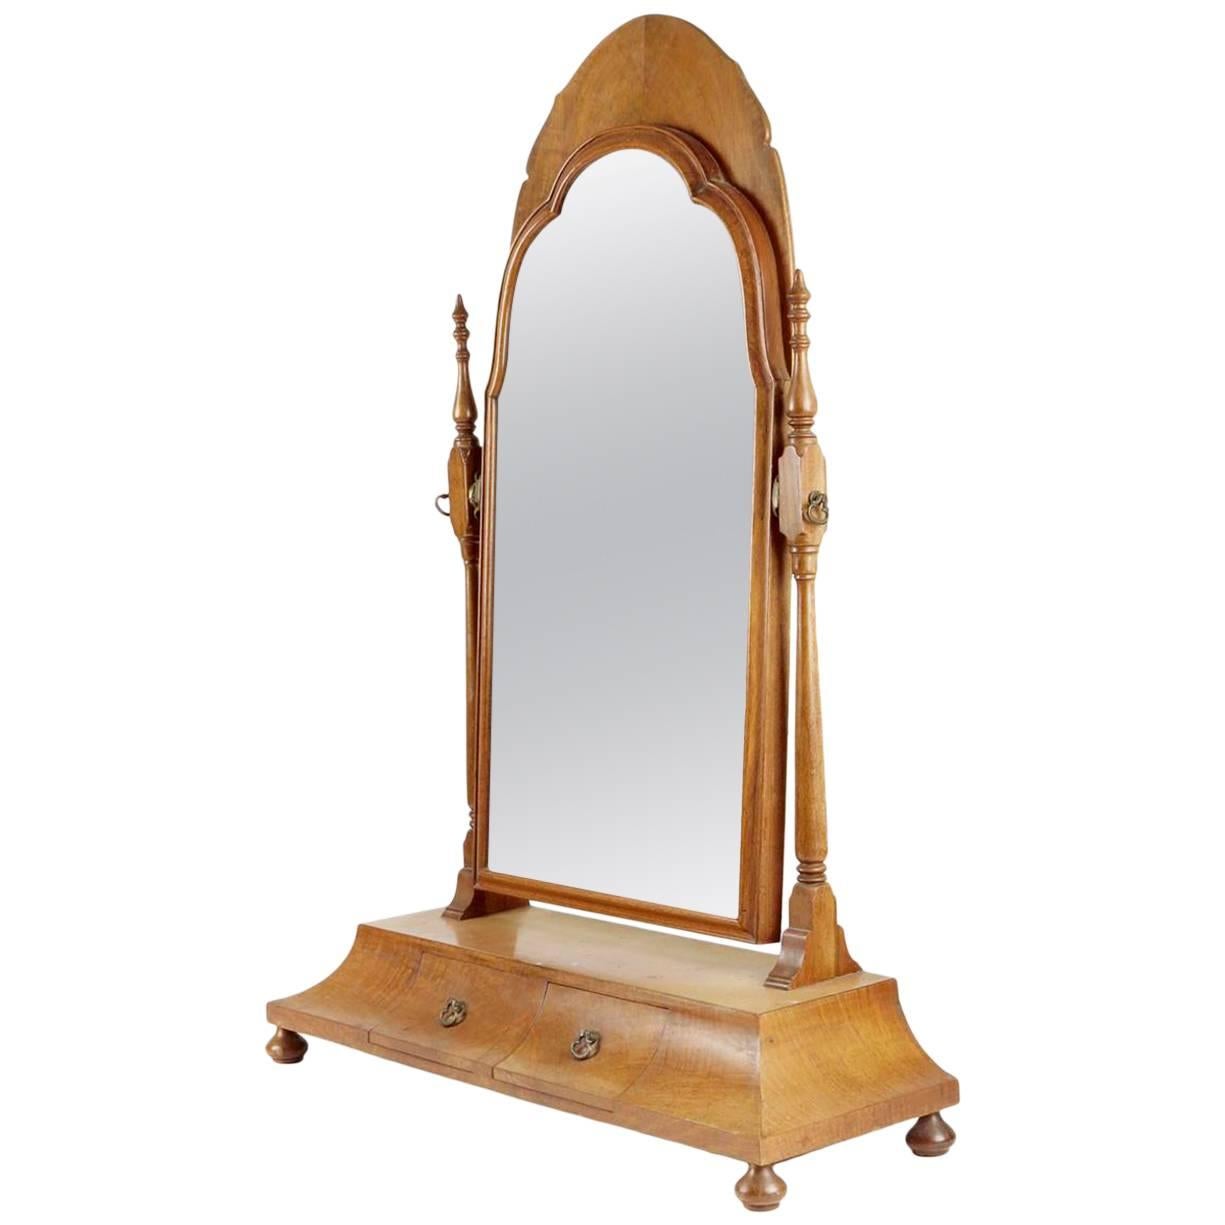 Good Quality Walnut Dressing Table Mirror in the Style of Sir Robert Lorimer